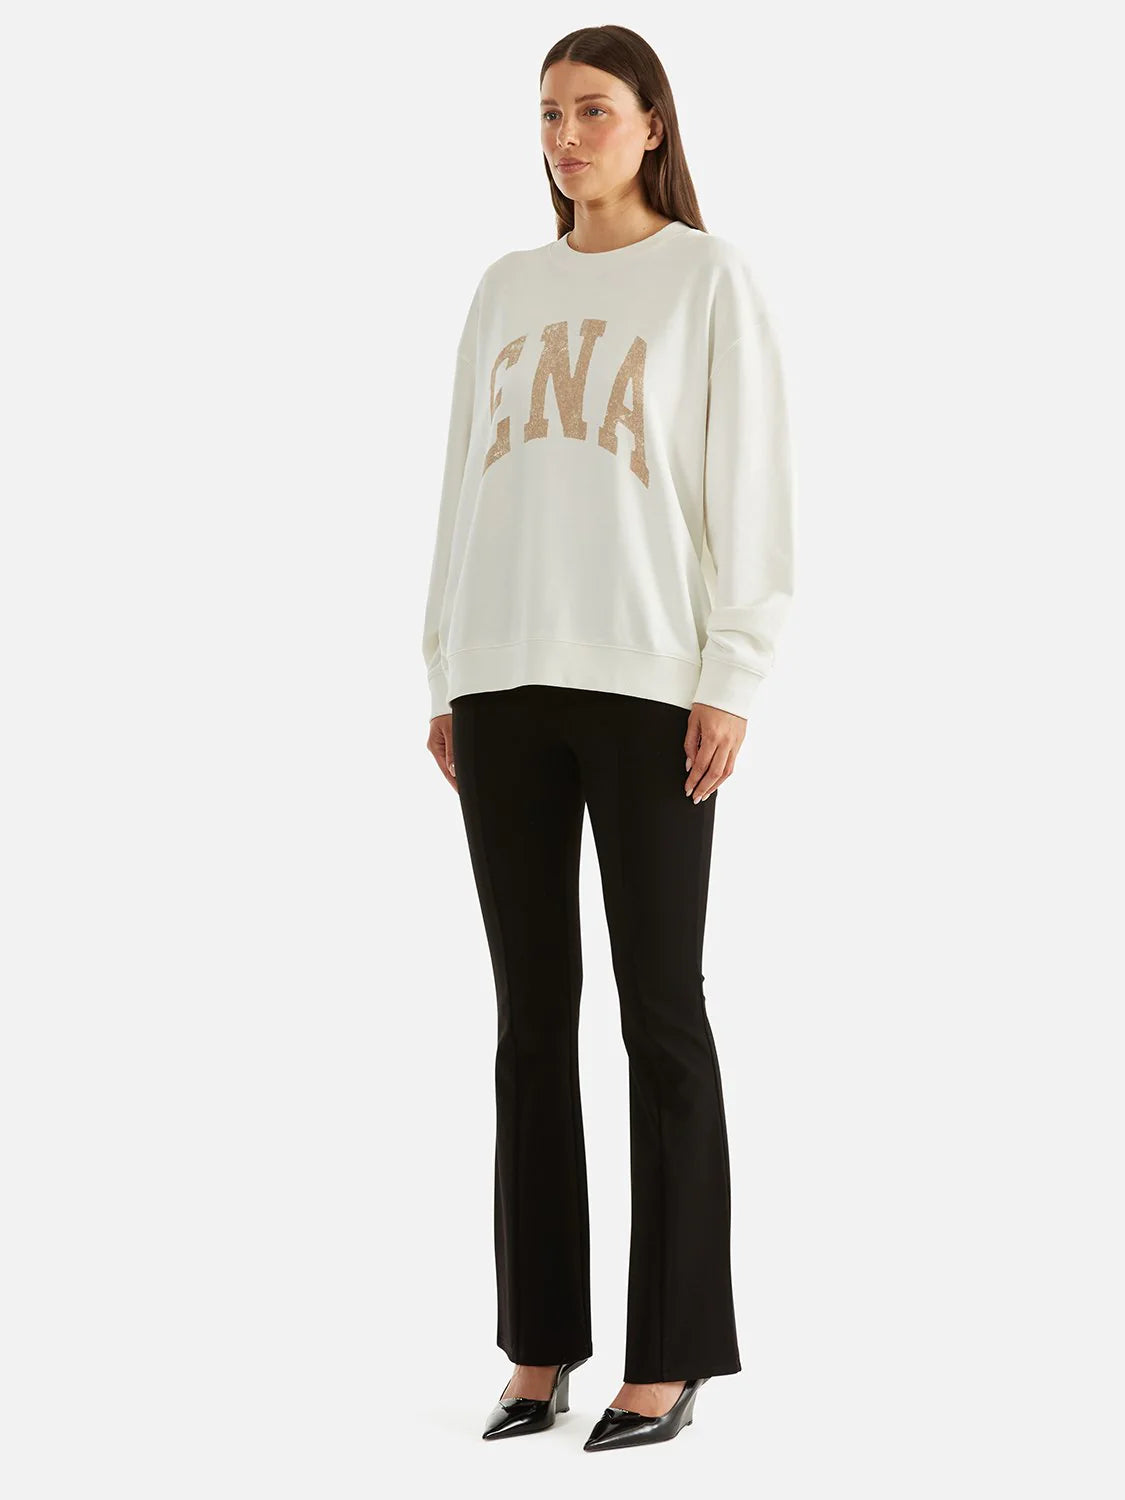 ENA Pelly II LILLY Oversized Sweater College - White